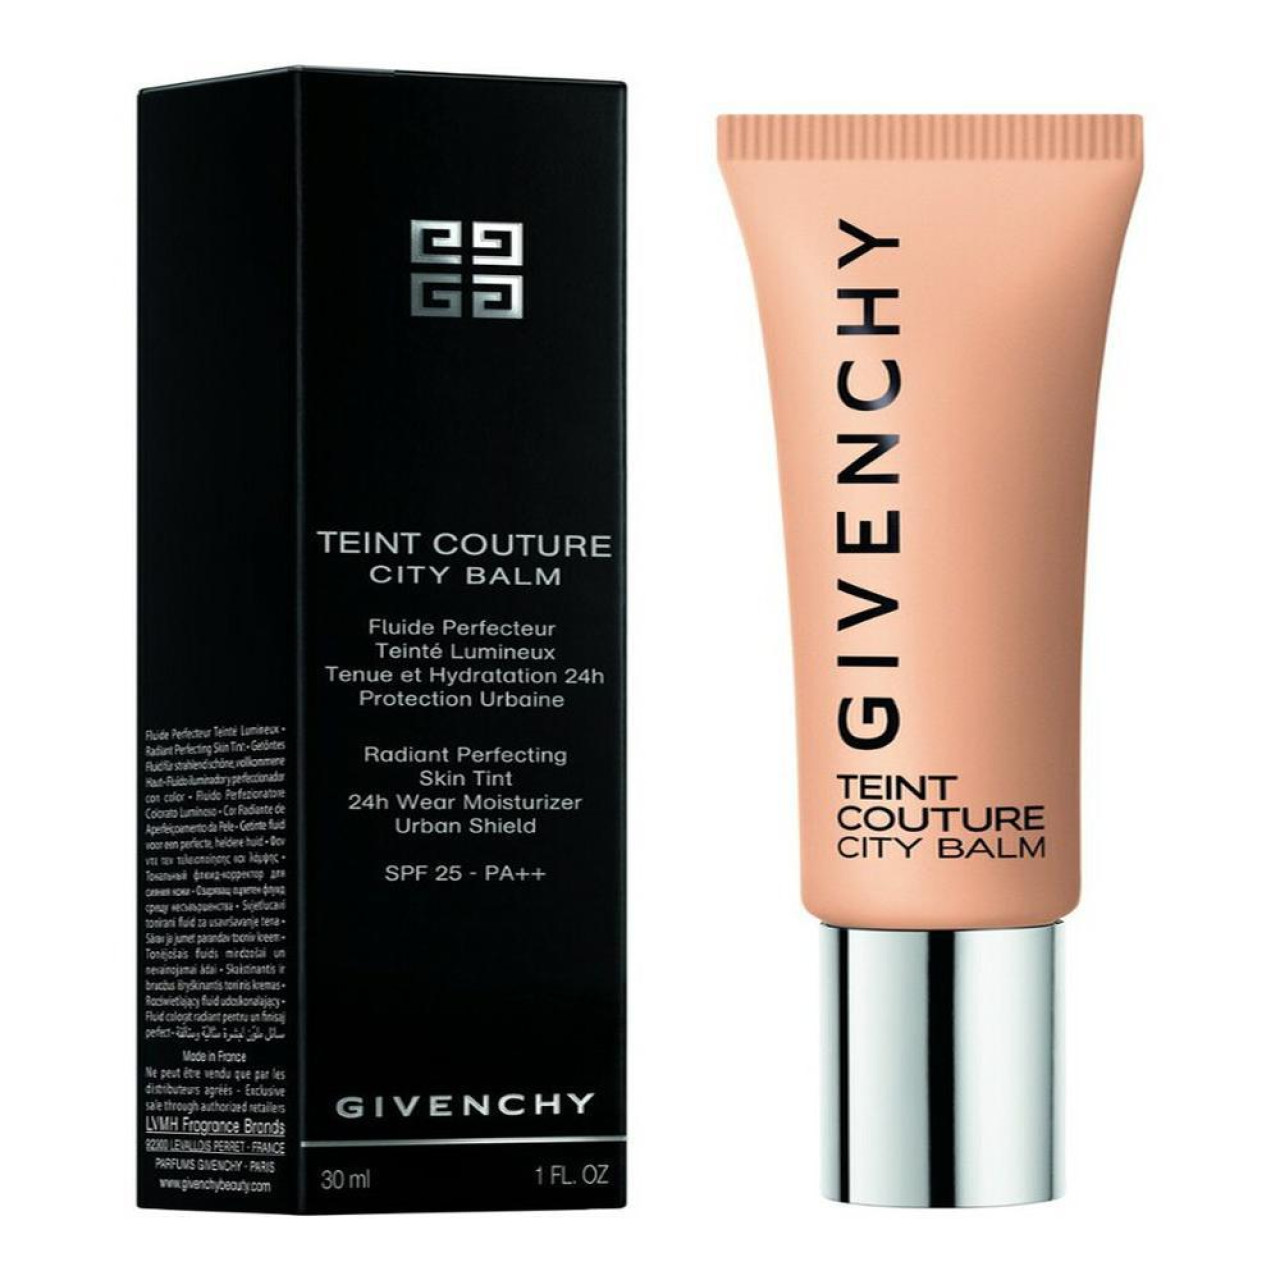 Givenchy teint couture city balm n490